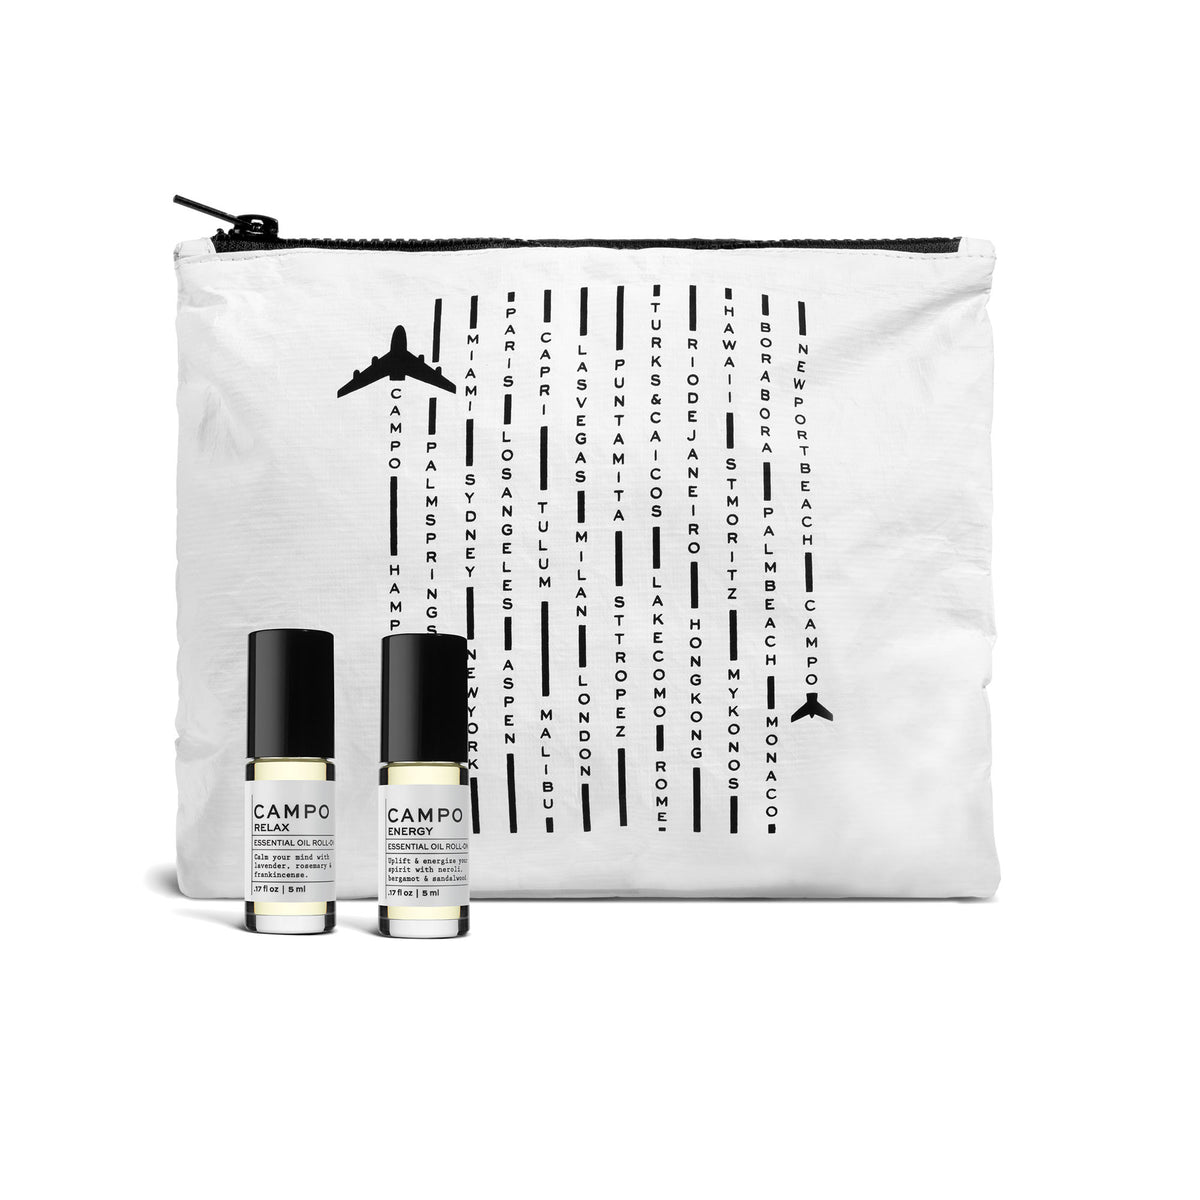 The perfect essential oil roll-on duo to uplift your spirits and help you relax on the go. Ease jitters and combat jet lag with these metal ball roll-ons that provide soothing pulse point therapy in any time zone. From LA to NY &amp; beyond this signature jet-set bag is perfect for travel and made from coated, protective Tyvek material (wet/dry).            